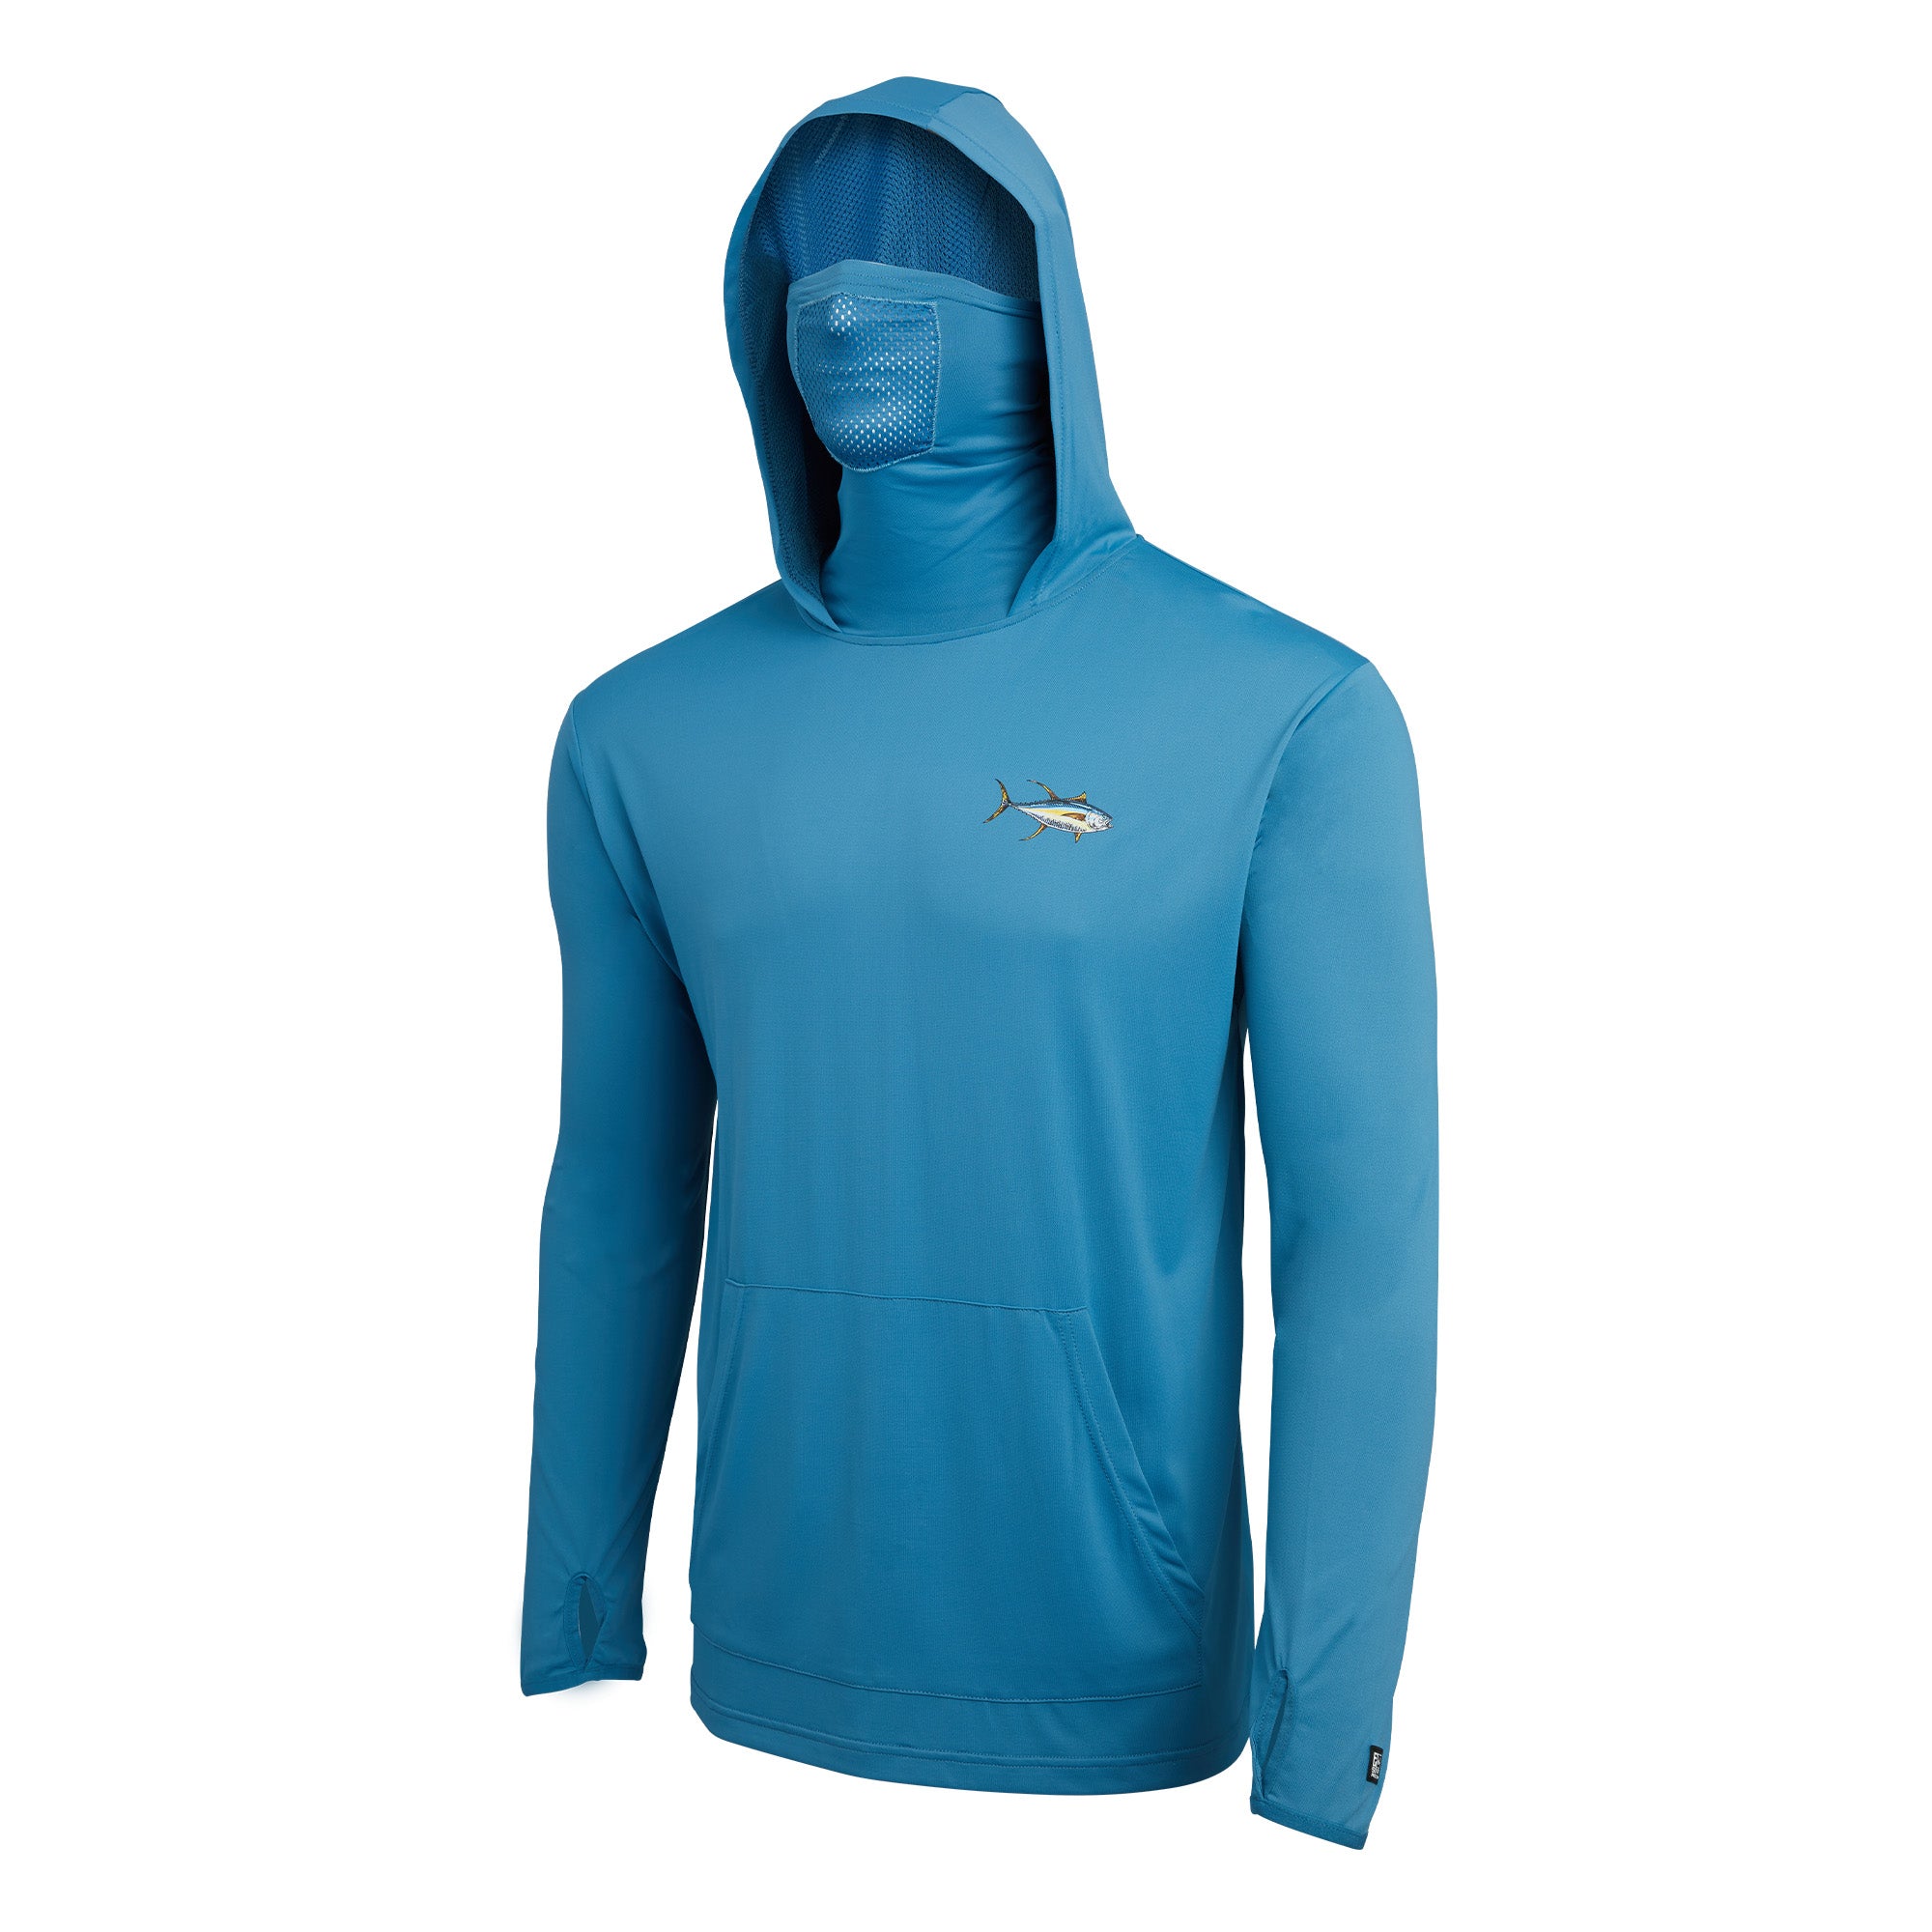 Simms L/S Guide Shirt - Coral Reef, S